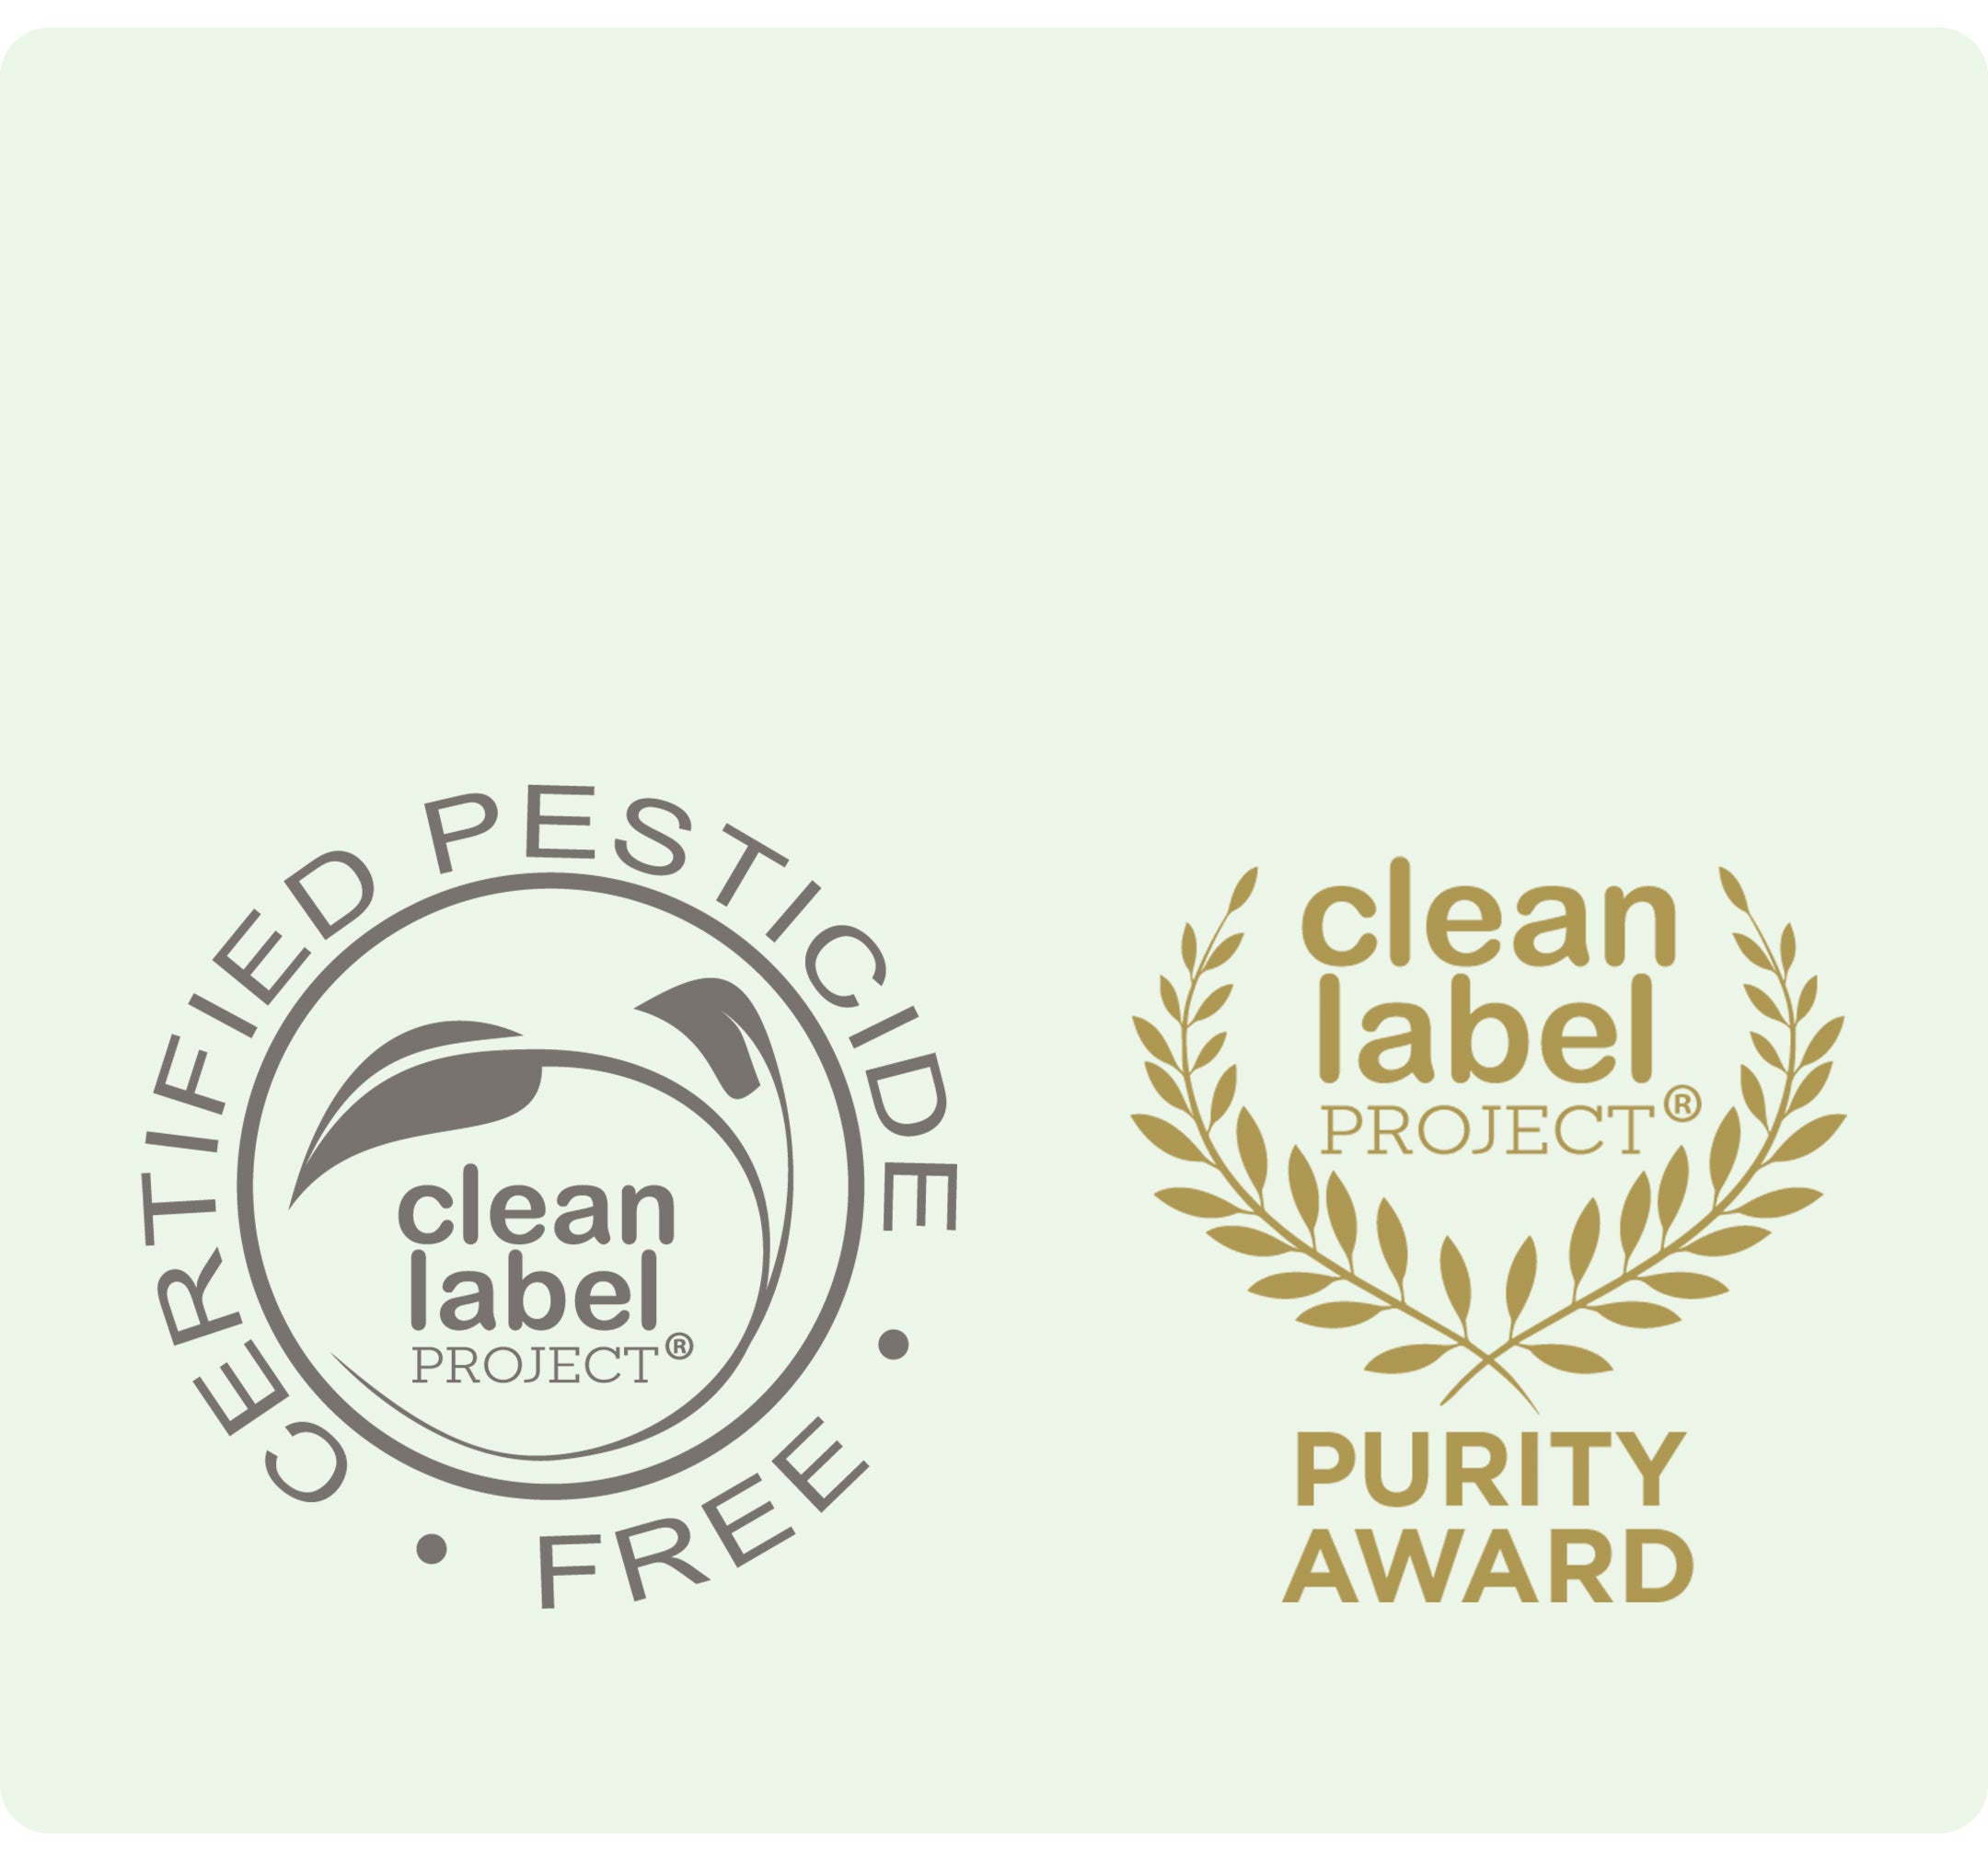 Illustration of Our Clean Label Project Certification Logos - Once Upon a Farm is a Proud Recipient of the Purity Award and Certified Pesticide Free Award